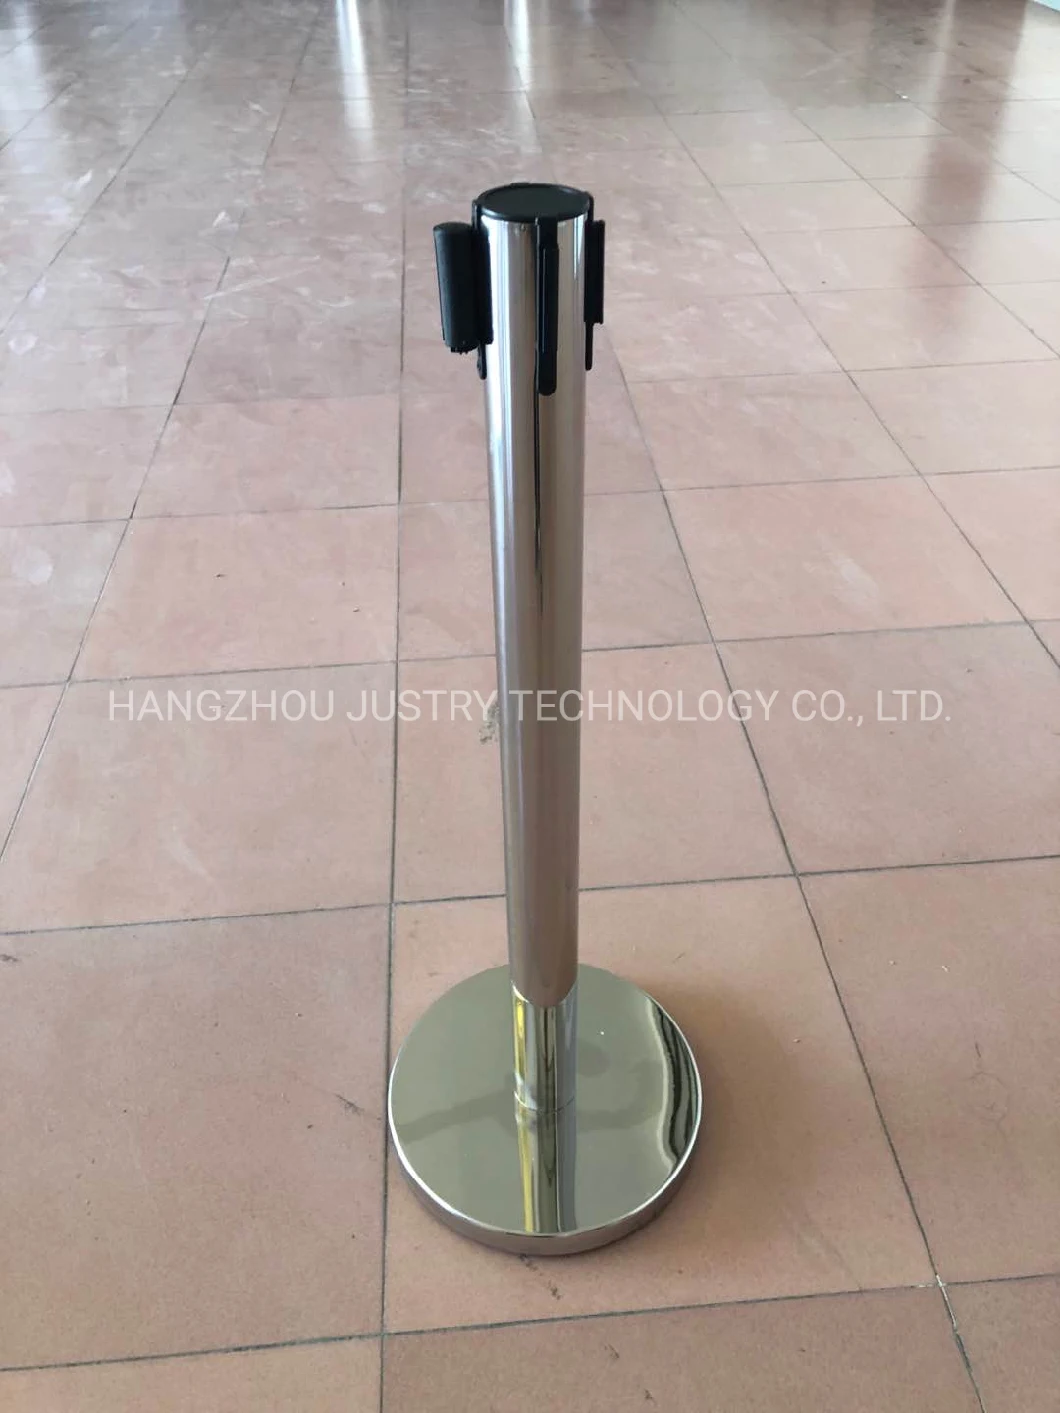 Bank Security Cordon Line up Isolation Retractable Ribbon Barrier